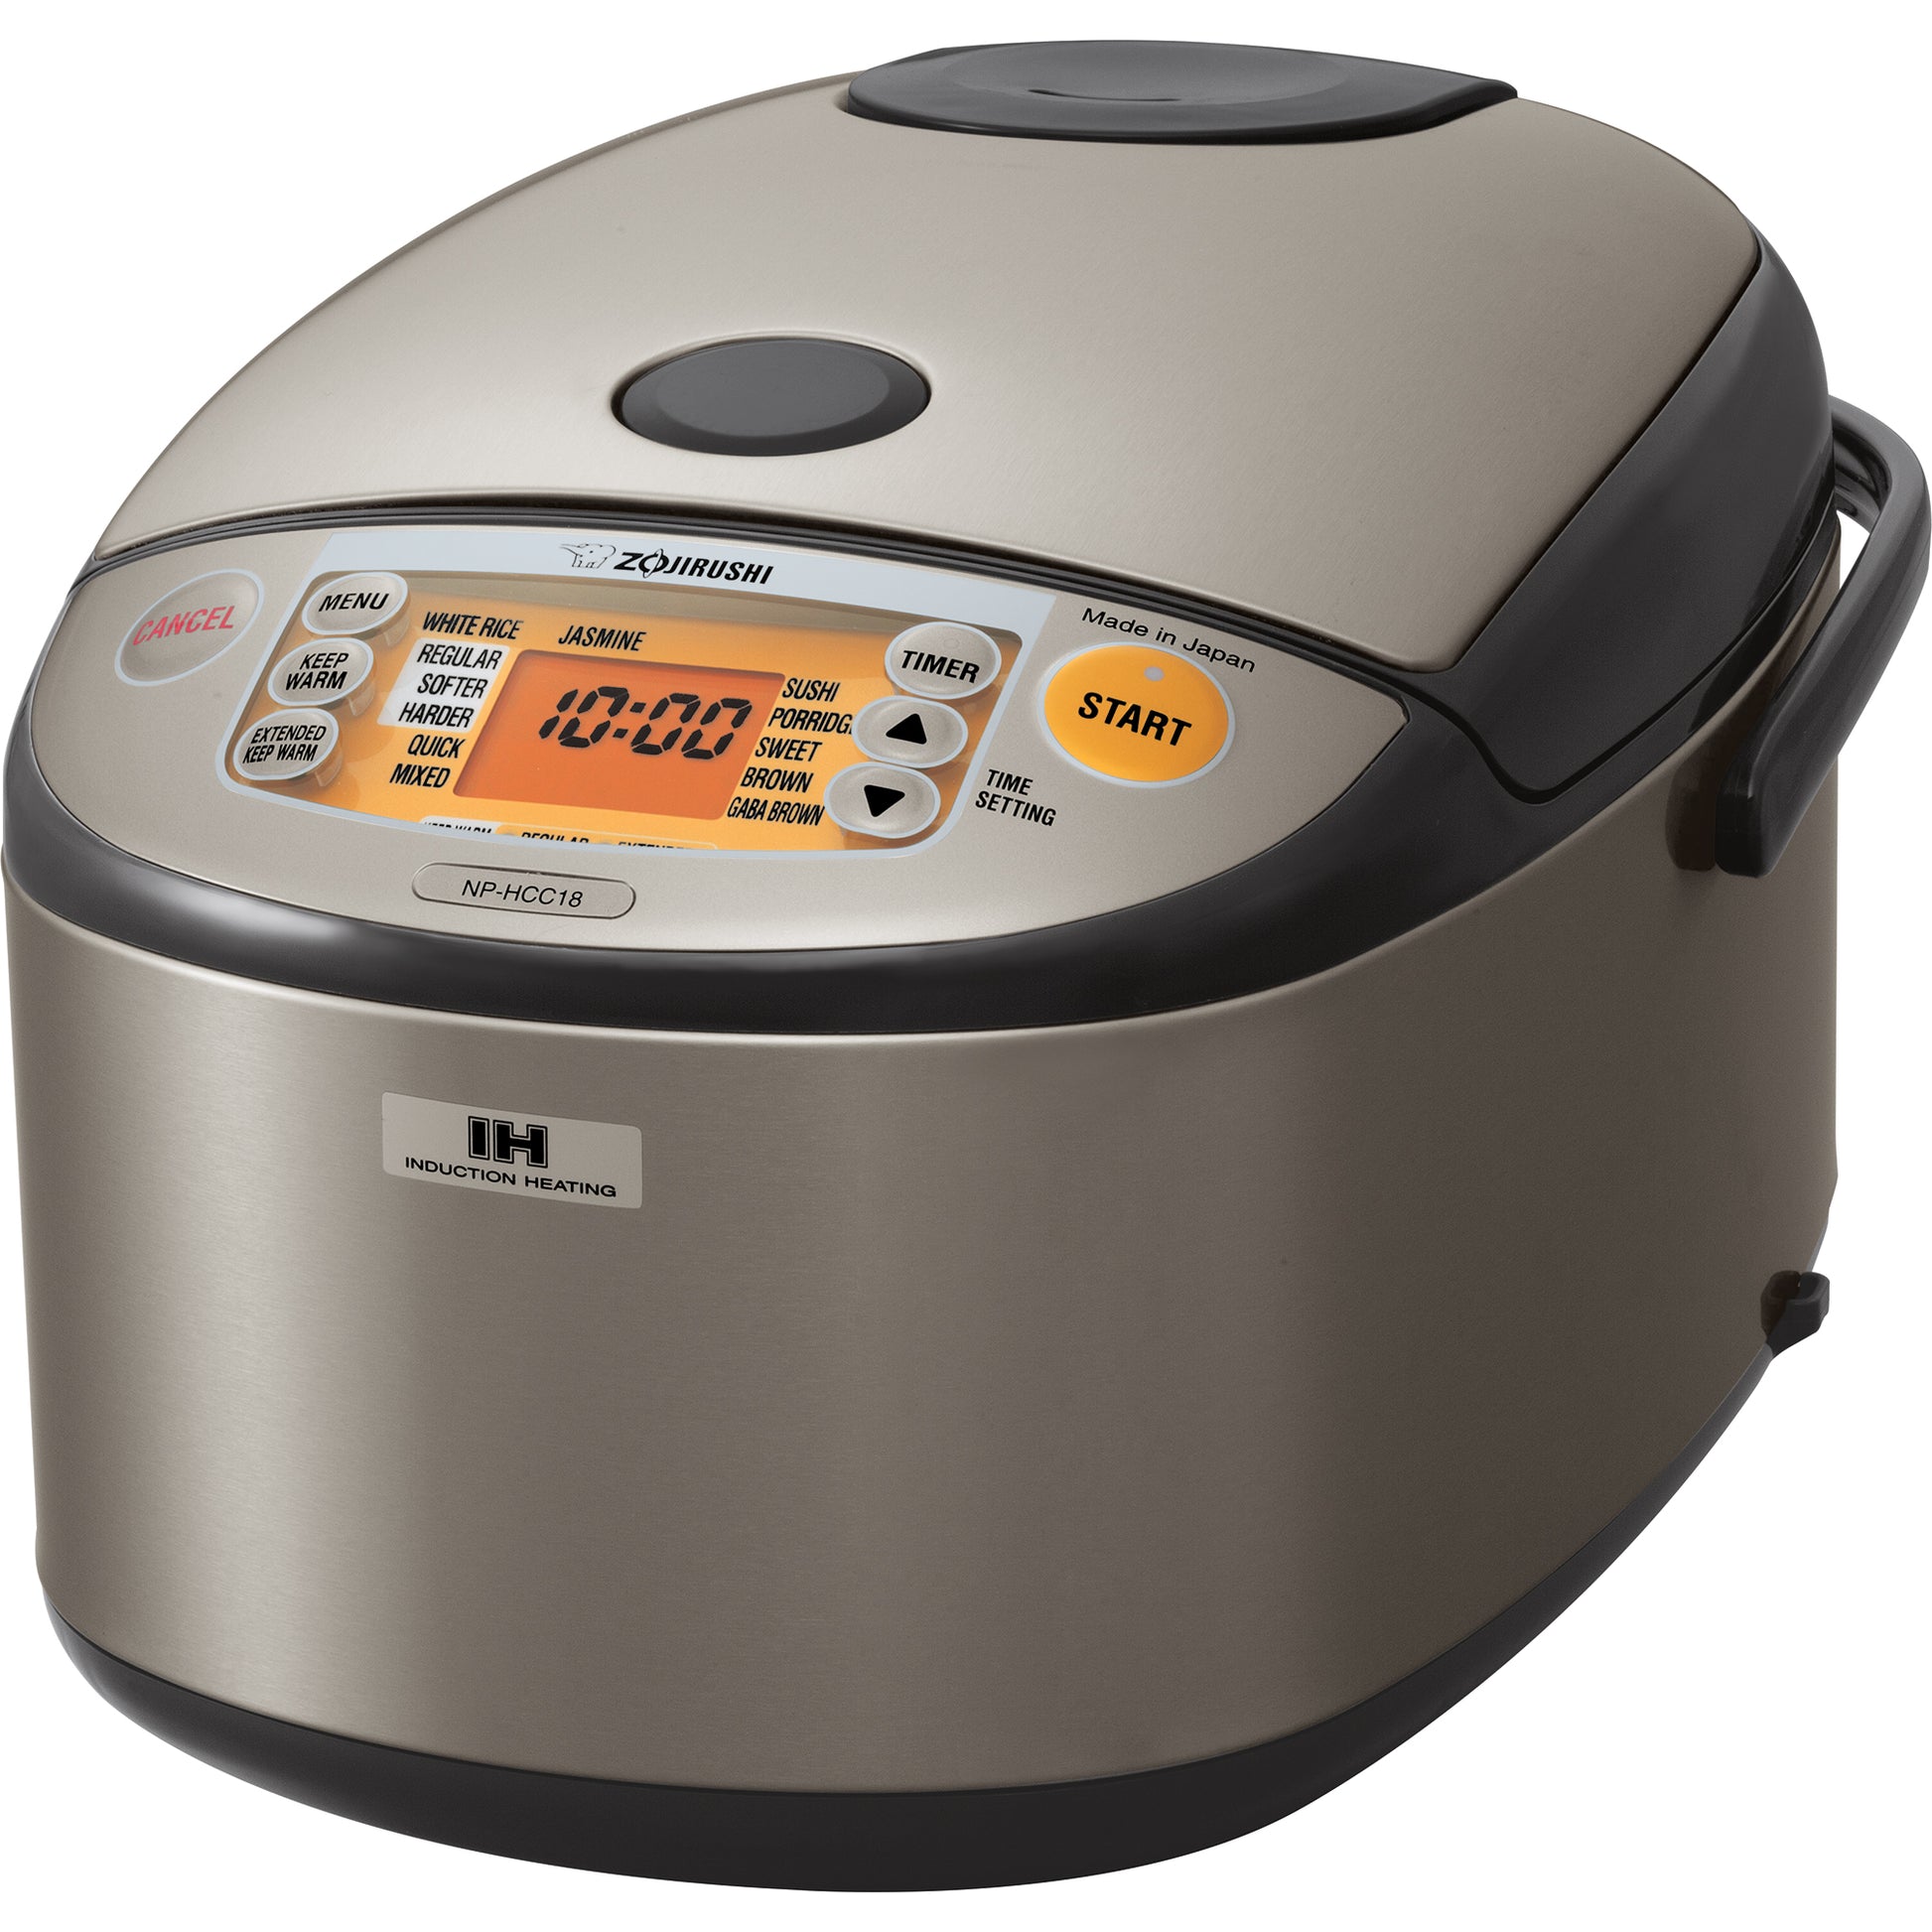 Black + Decker 2-In-1 Versatility 6-Cup Rice Cooker and Steamer 1 ea